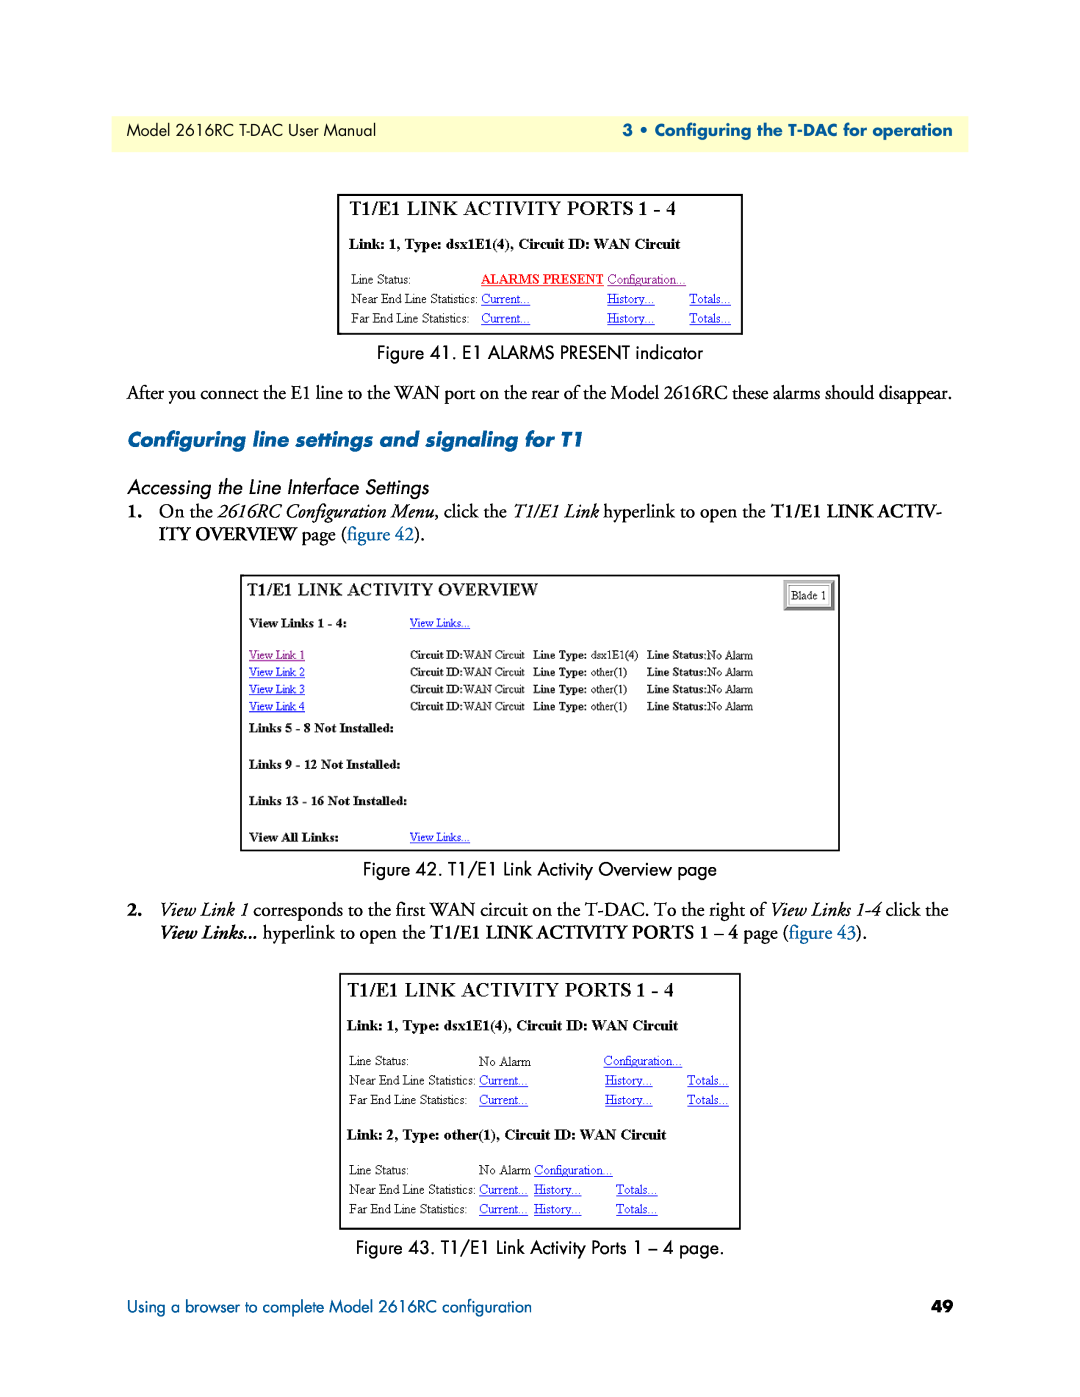 Patton electronic 2616RC user manual Configuring line settings and signaling for T1, Accessing the Line Interface Settings 